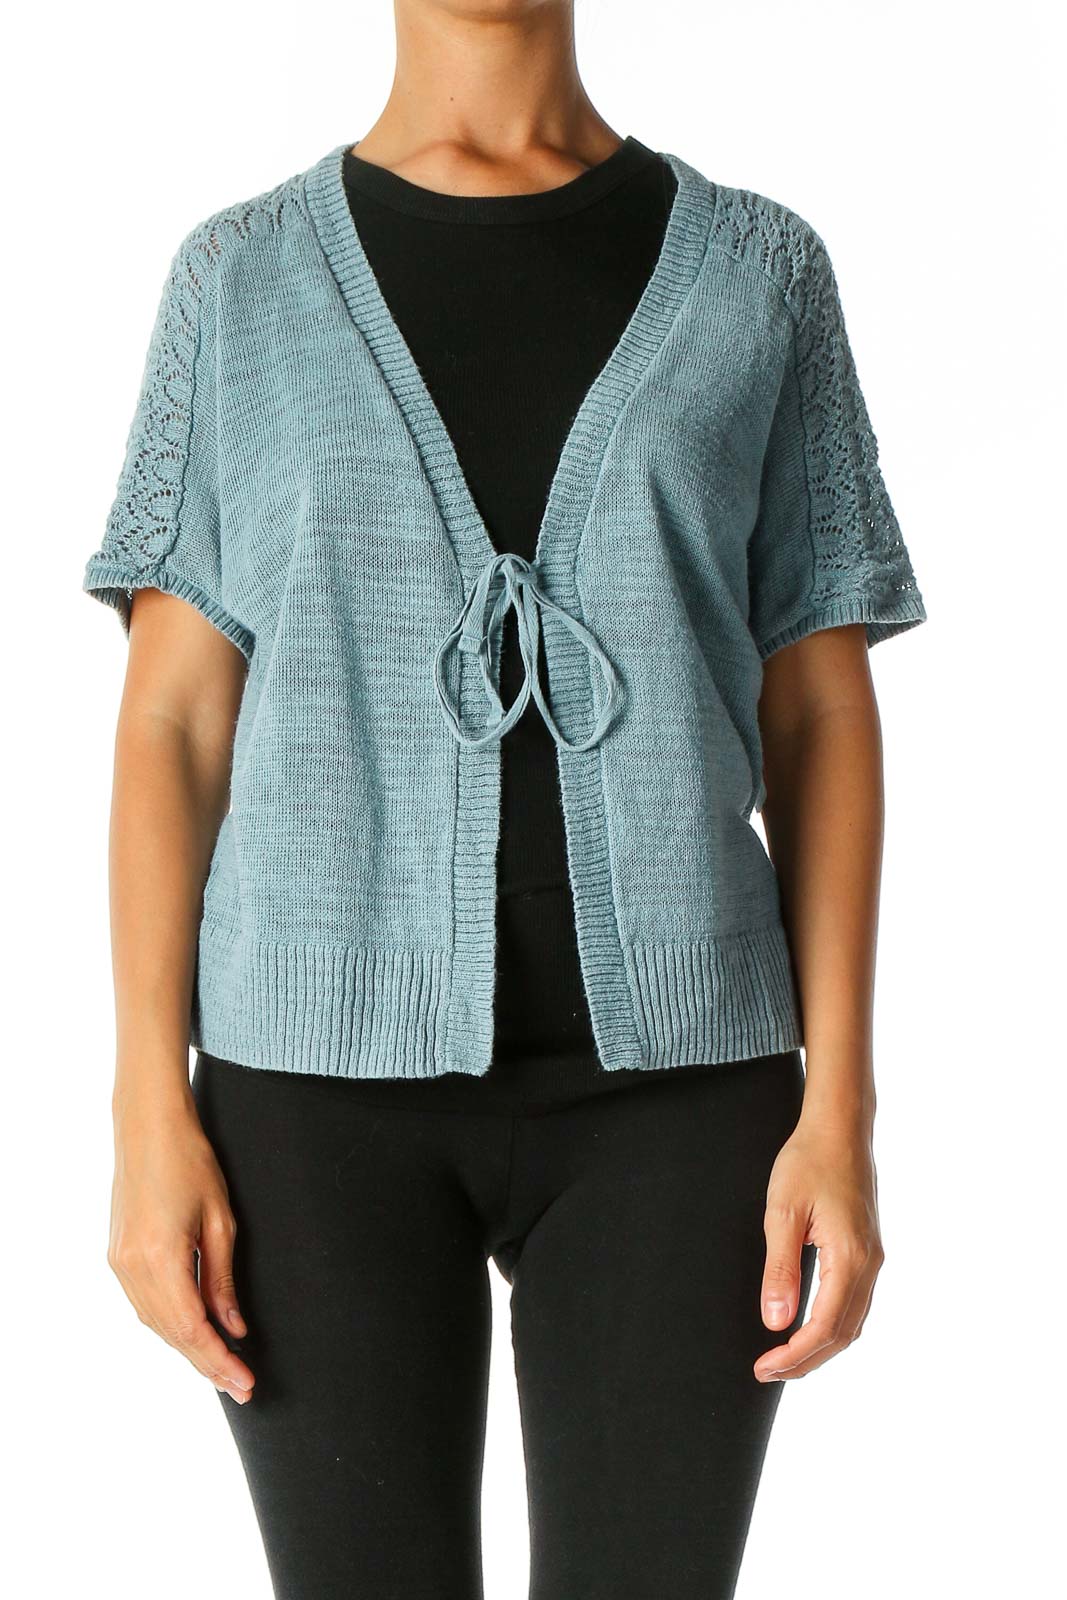 Blue Knitted Cardigan Front